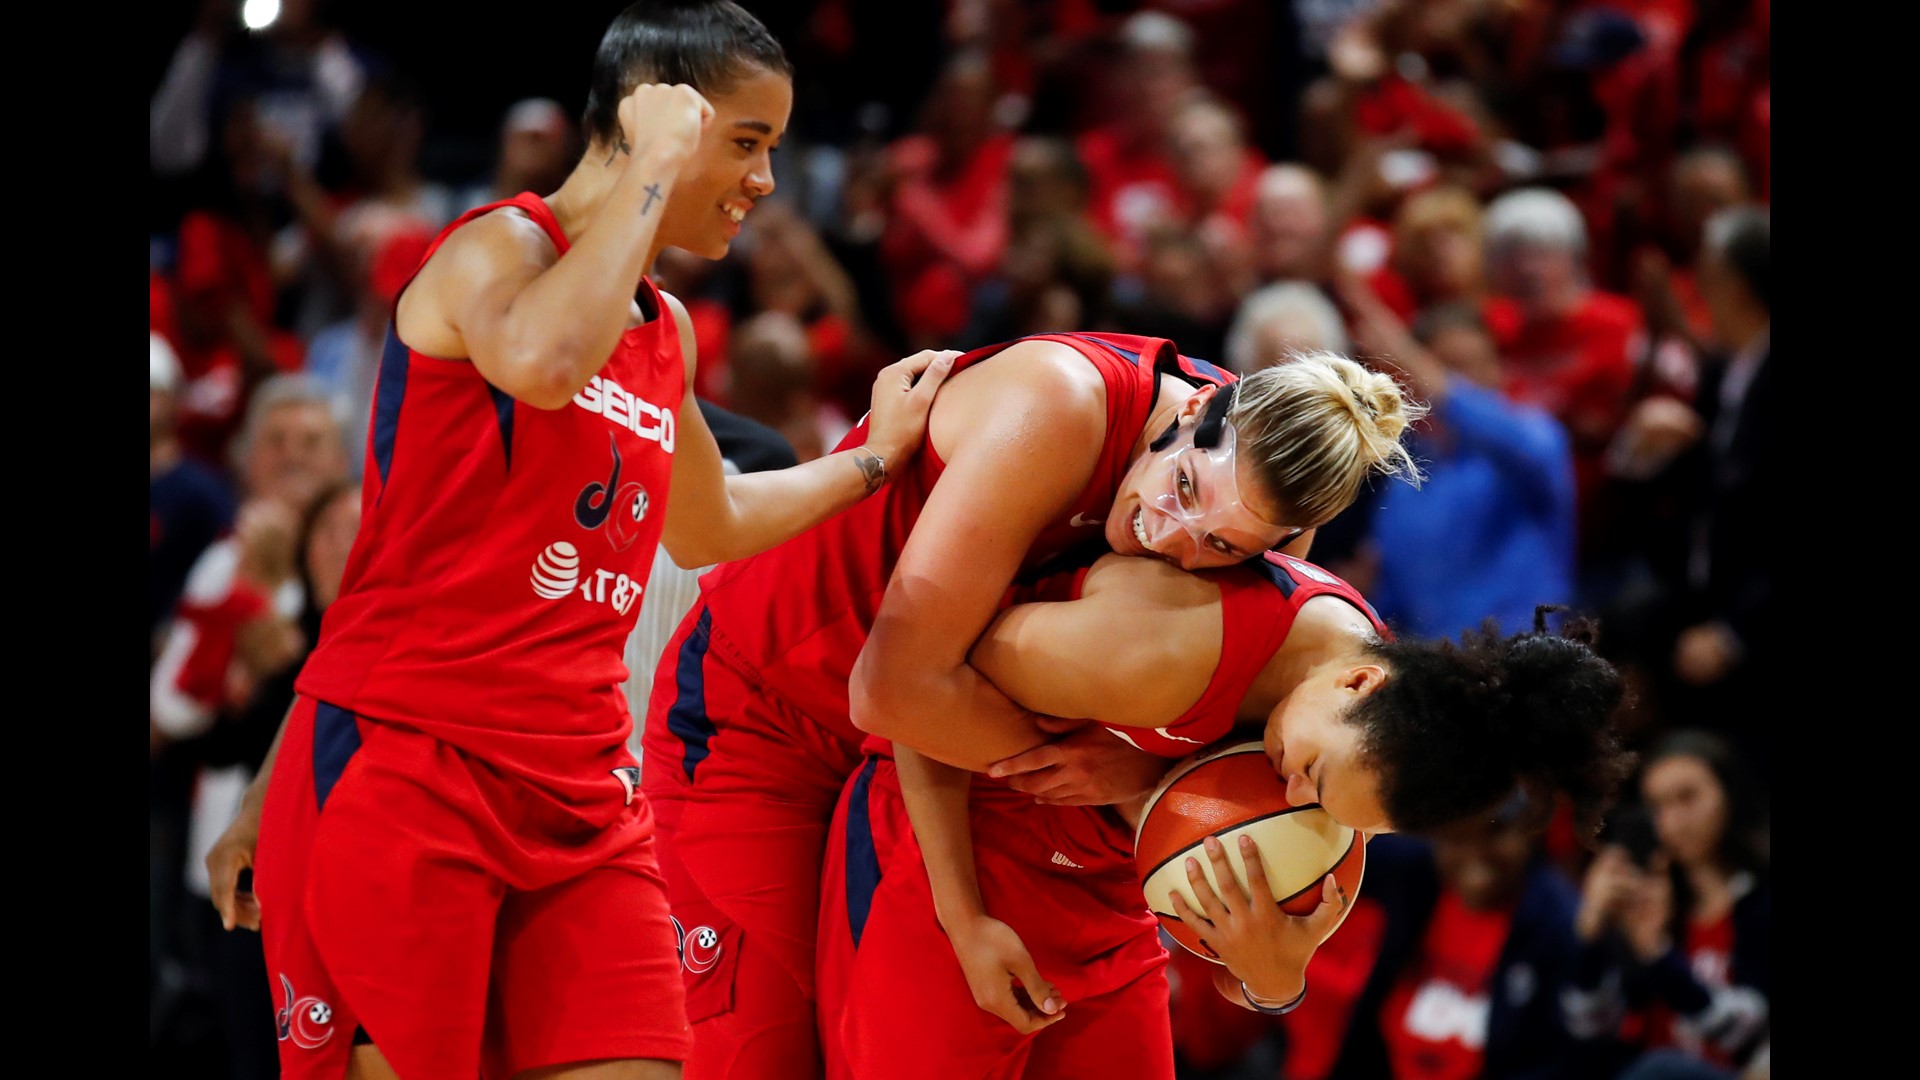 D.C. is a buzz Friday after the Mystics first WNBA championship win, but they're already packing up for their next job.